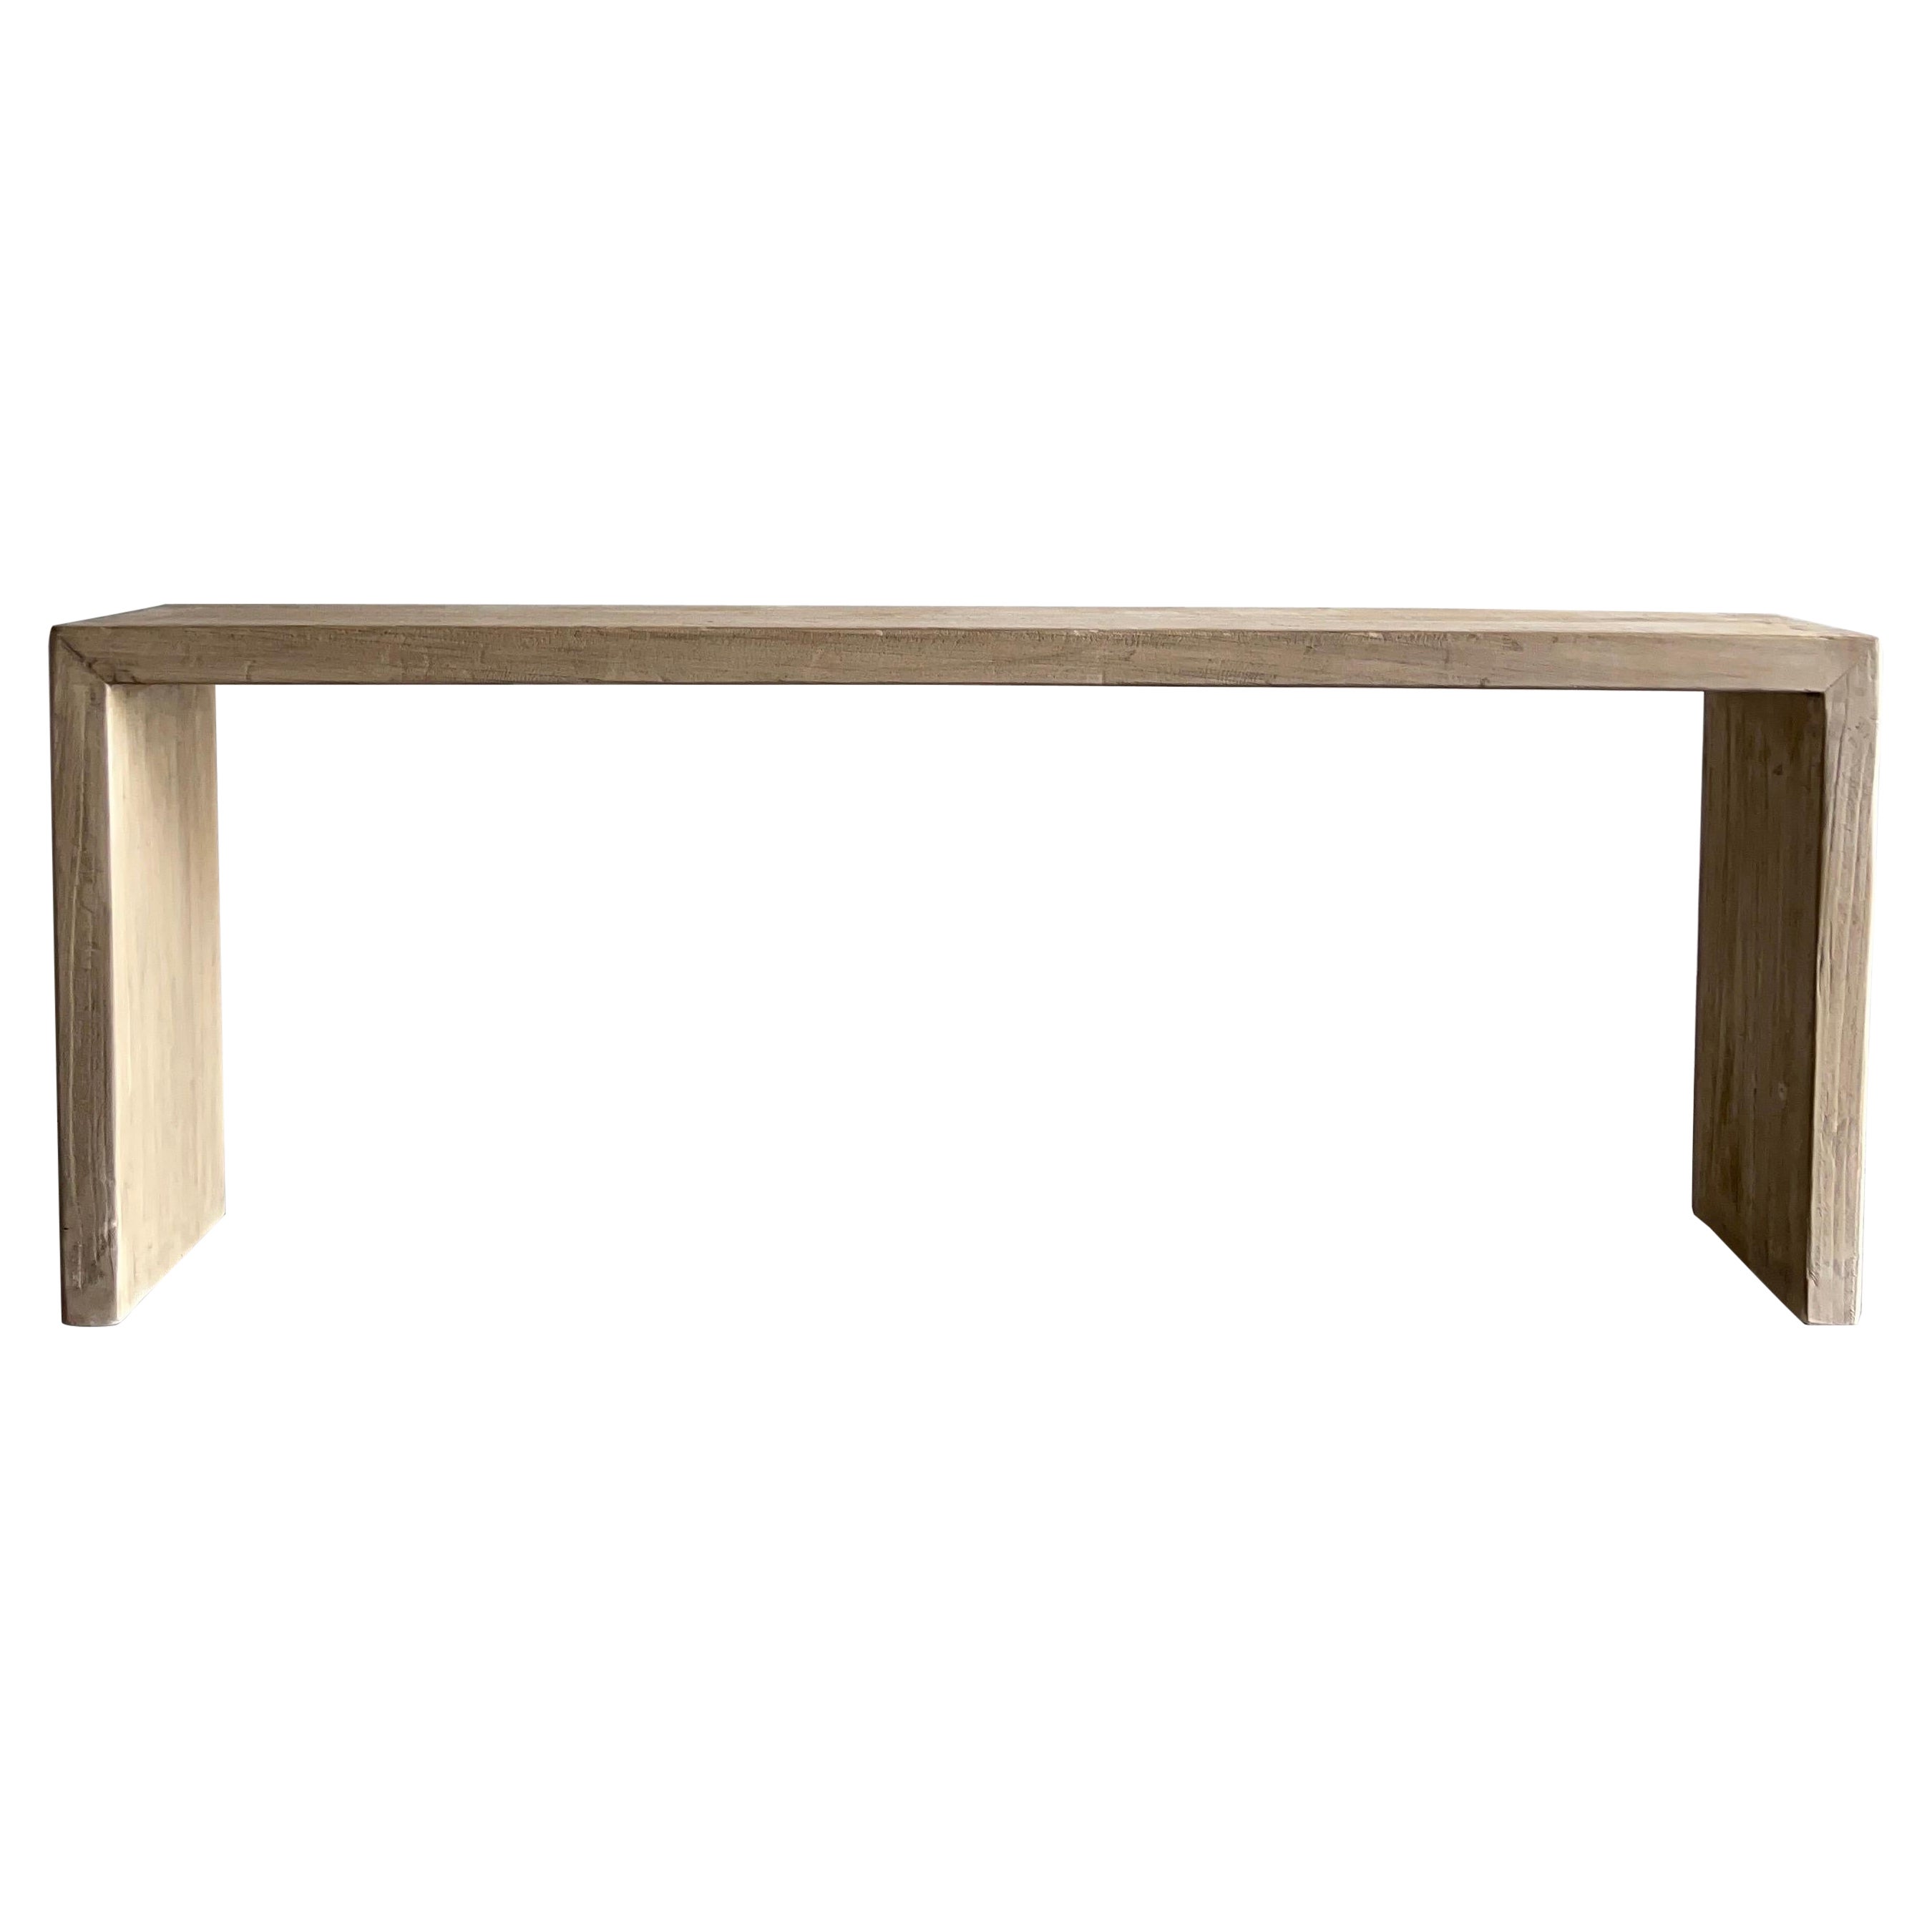 Modena Elm Wood Waterfall Console Natural For Sale